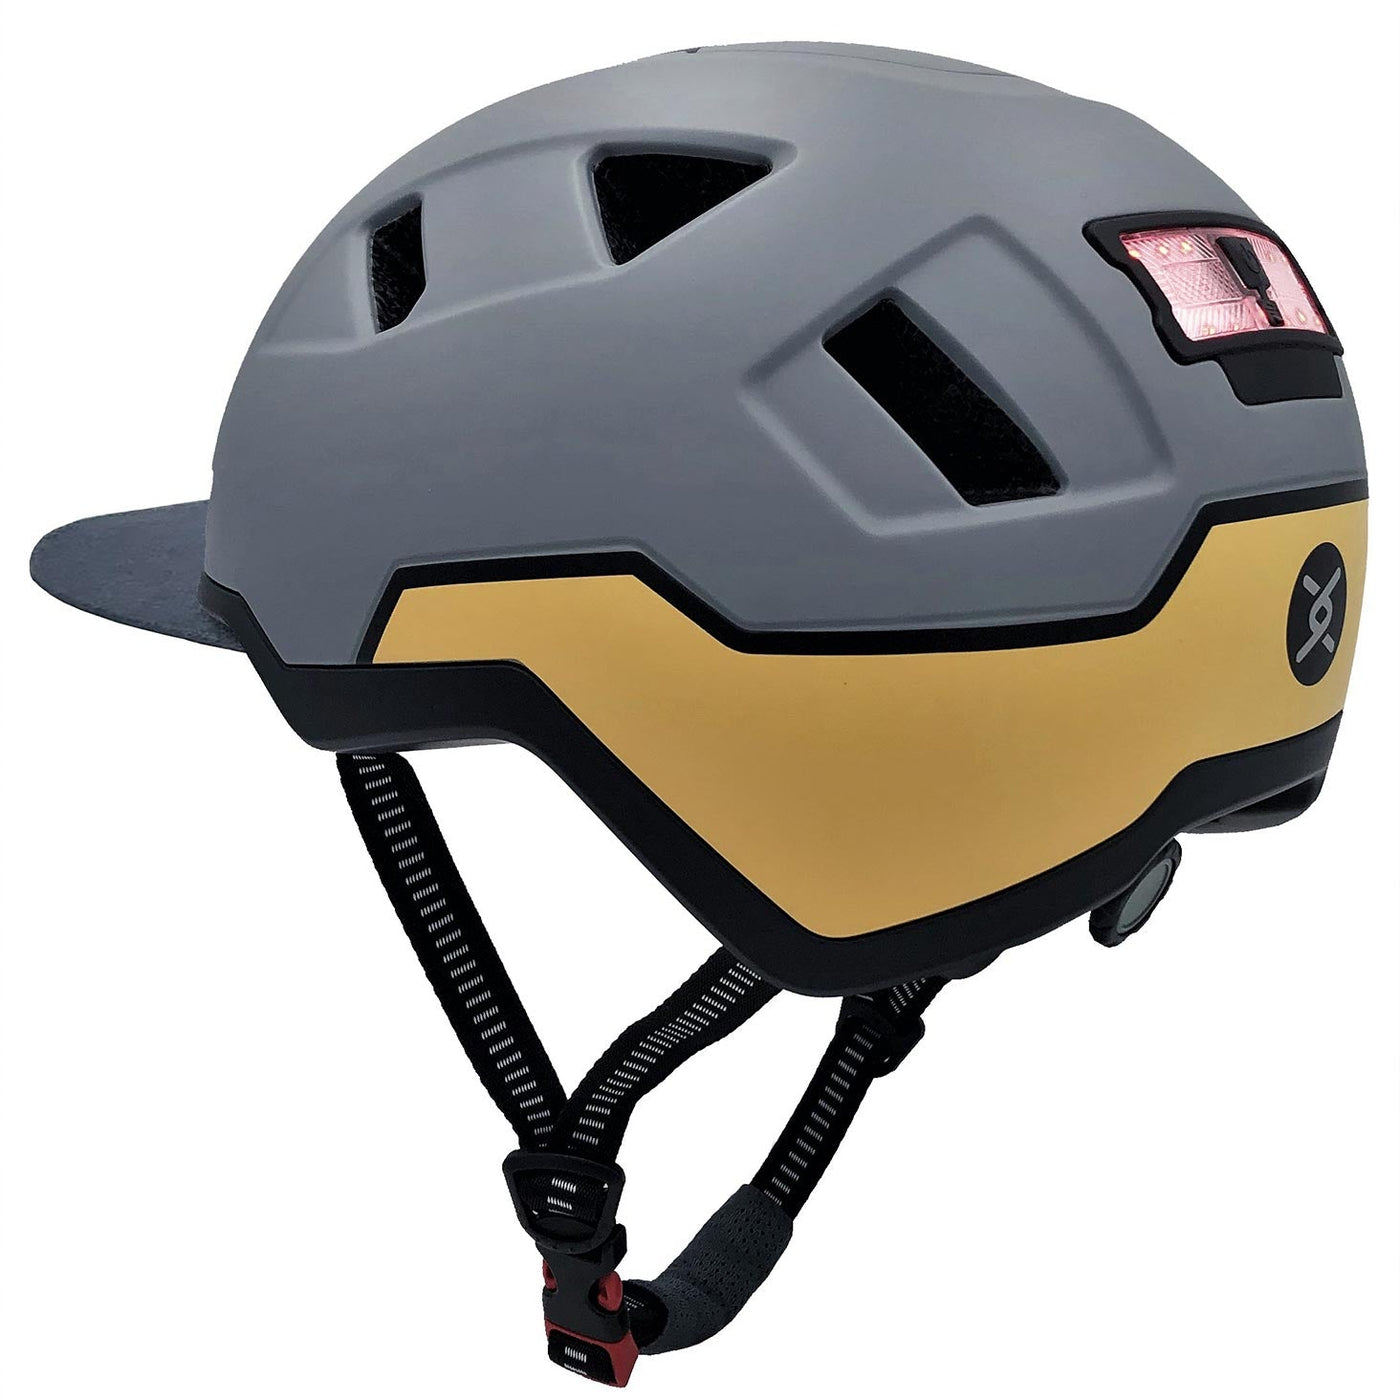 xnito ebike helmet with visor and lights  in gull color 